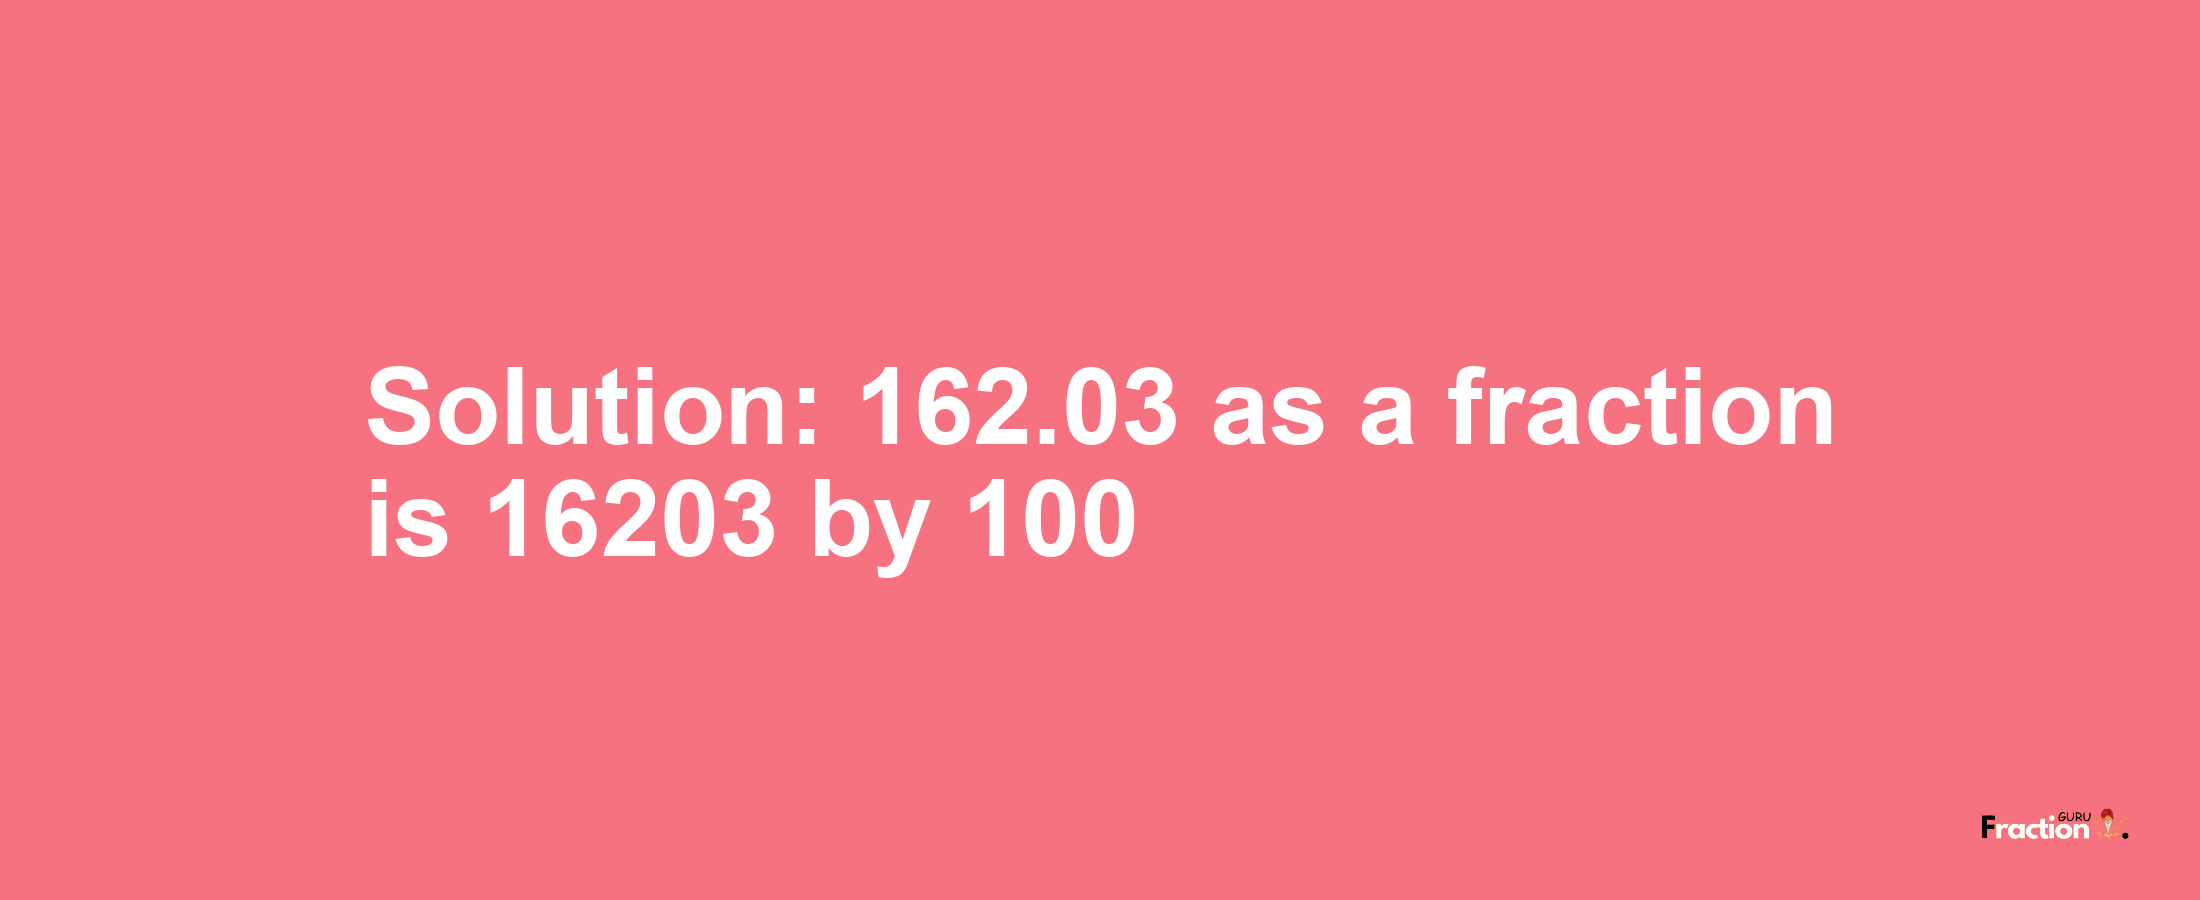 Solution:162.03 as a fraction is 16203/100